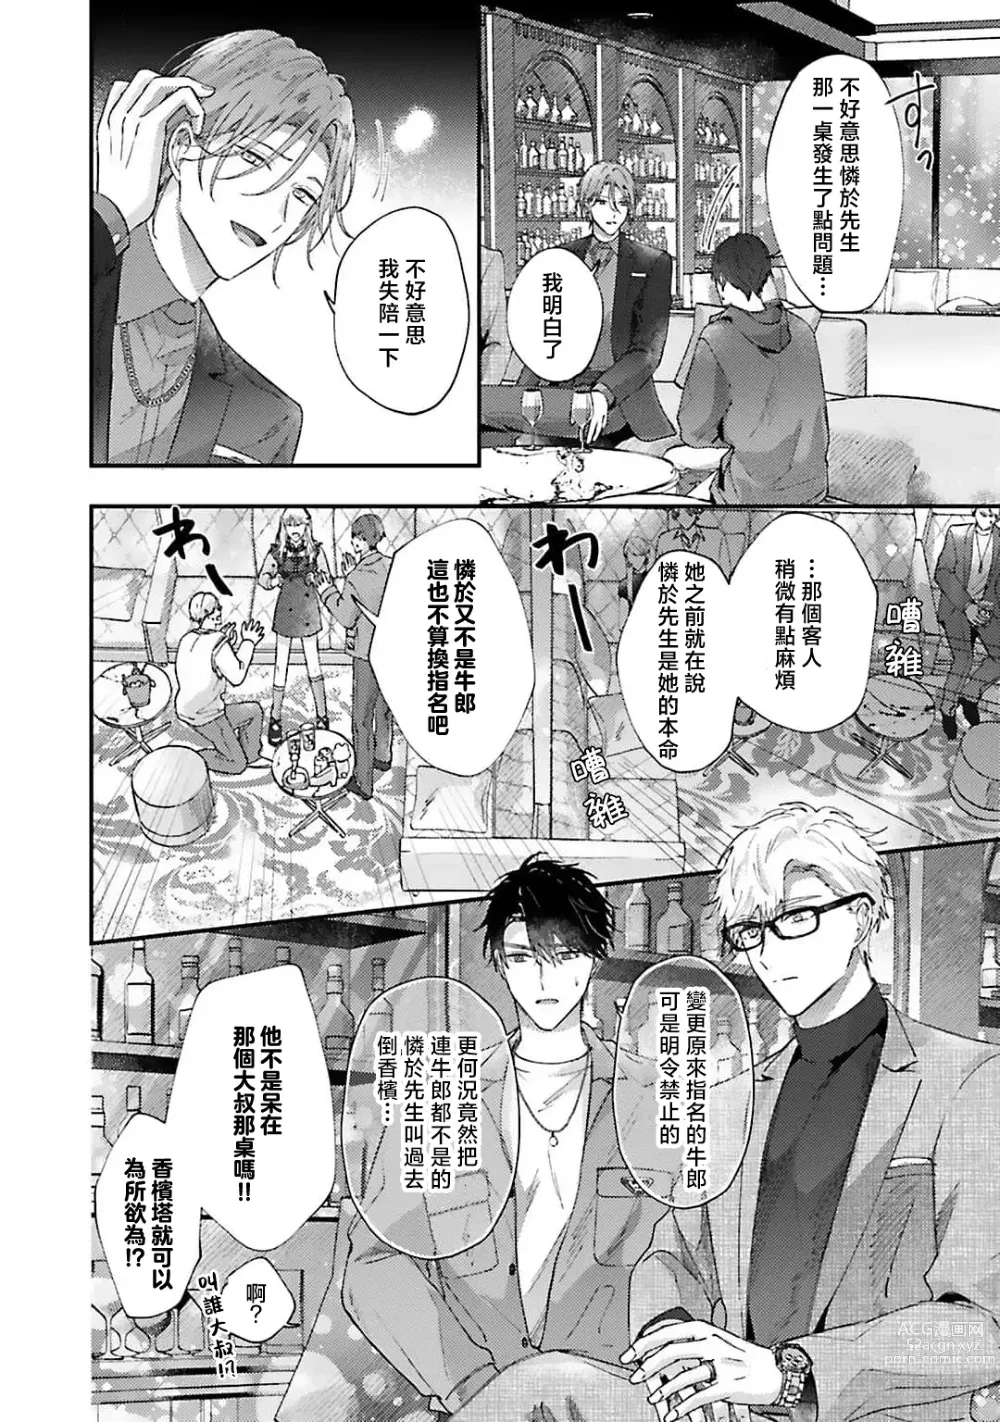 Page 22 of manga 开始当爸爸的两人 another 1